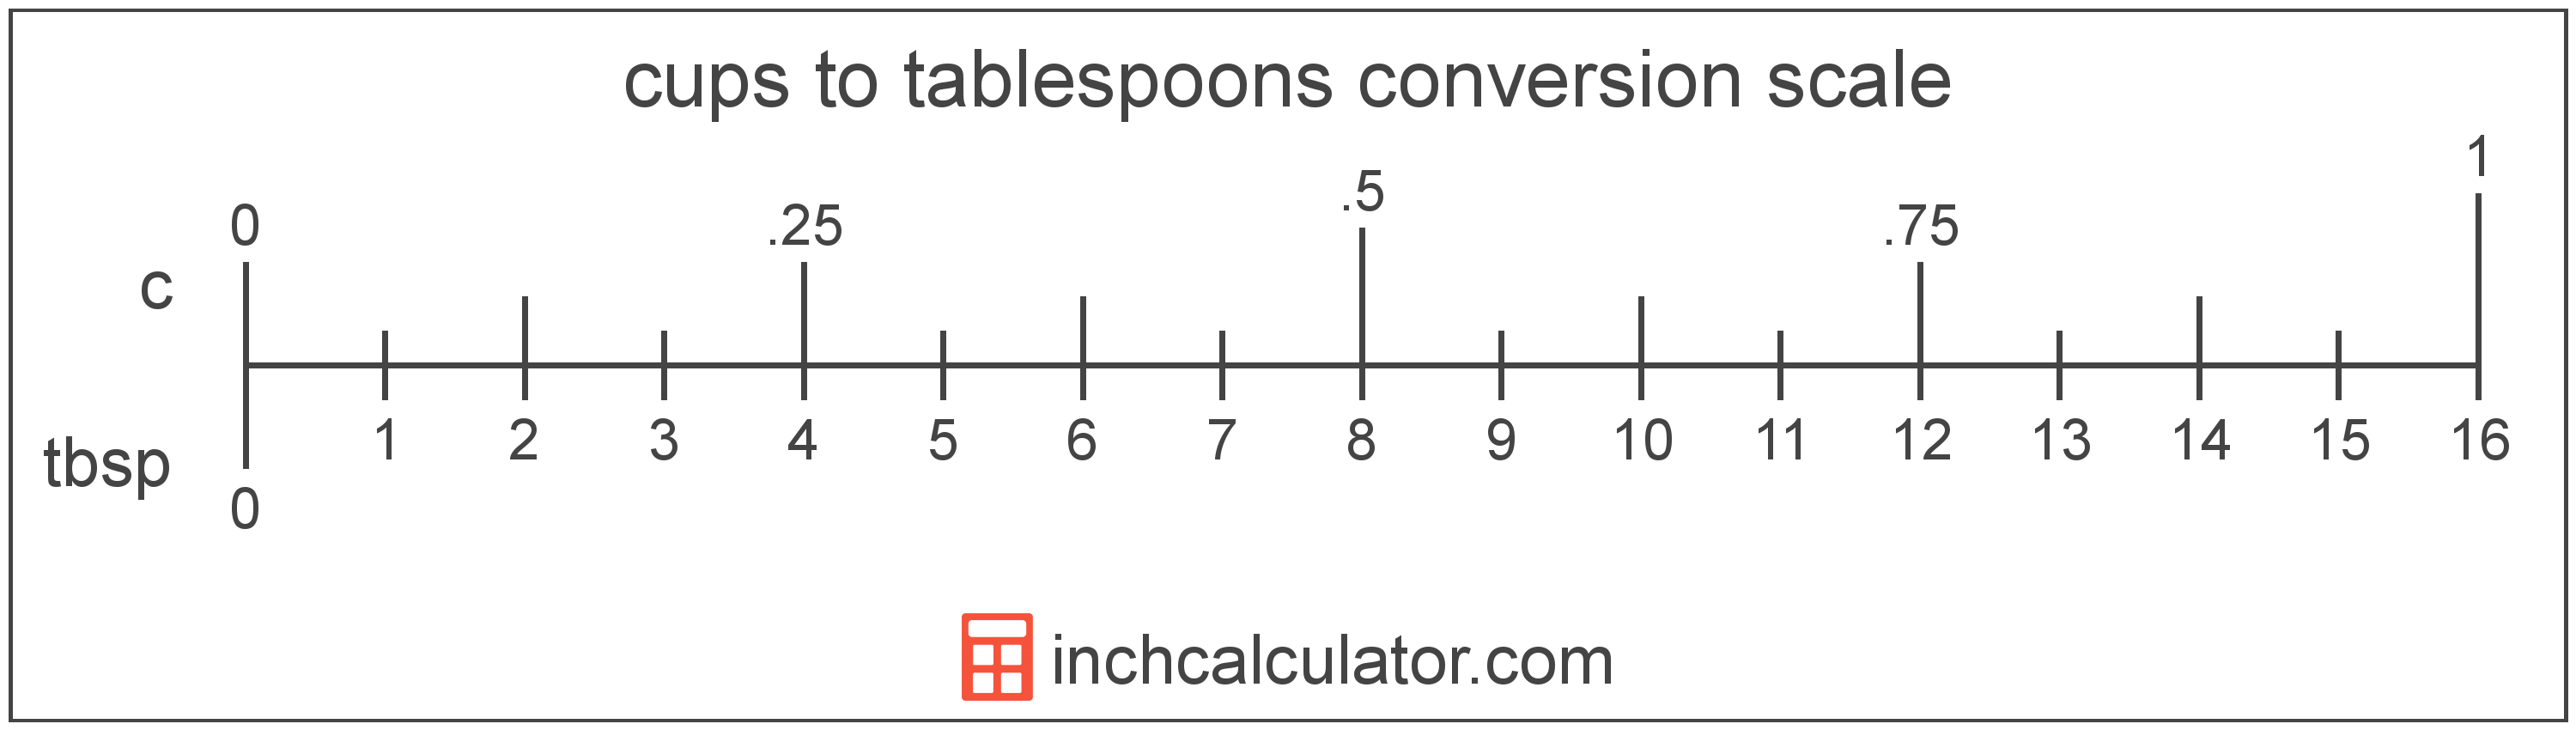 Cups To Tablespoons Conversion C To Tbsp Inch Calculator